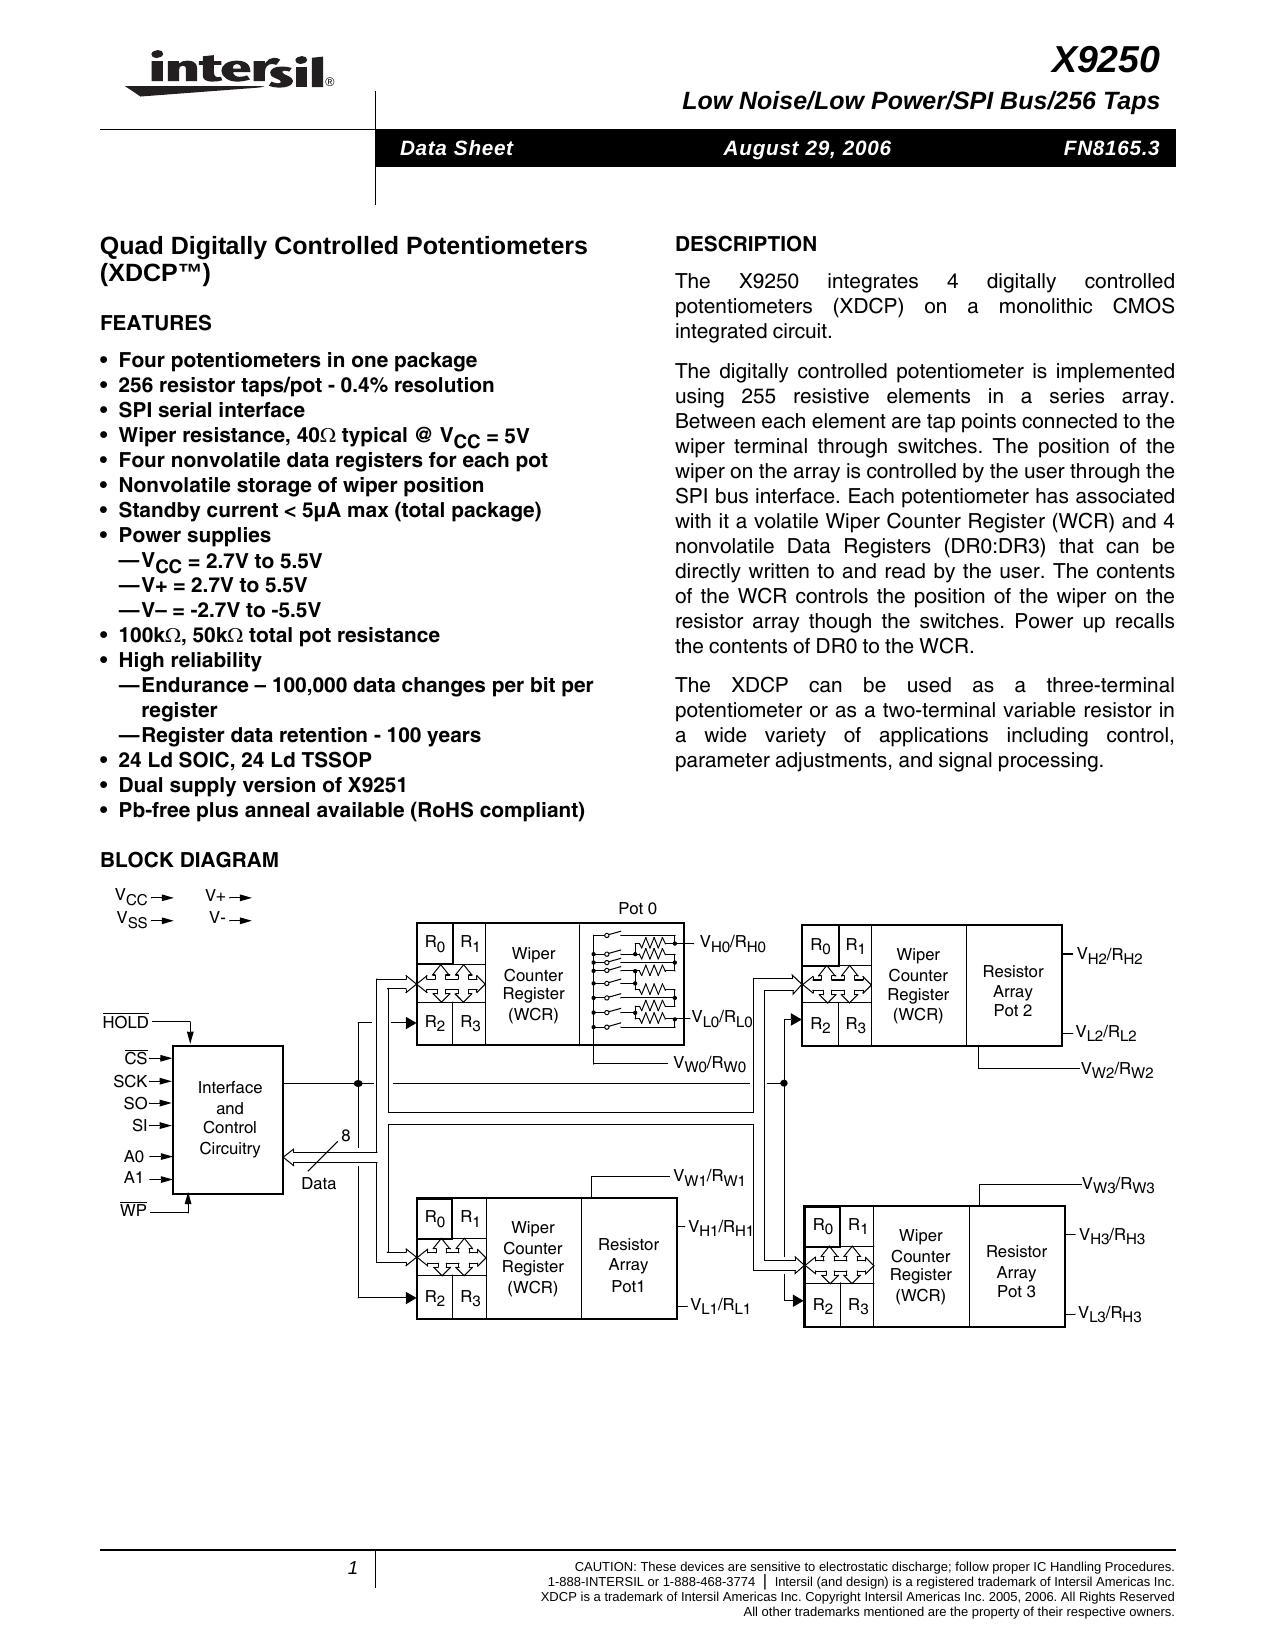 x9250-low-noise-low-power-ispi-bus-256-taps-quad-digitally-controlled-potentiometers-xdcp.pdf